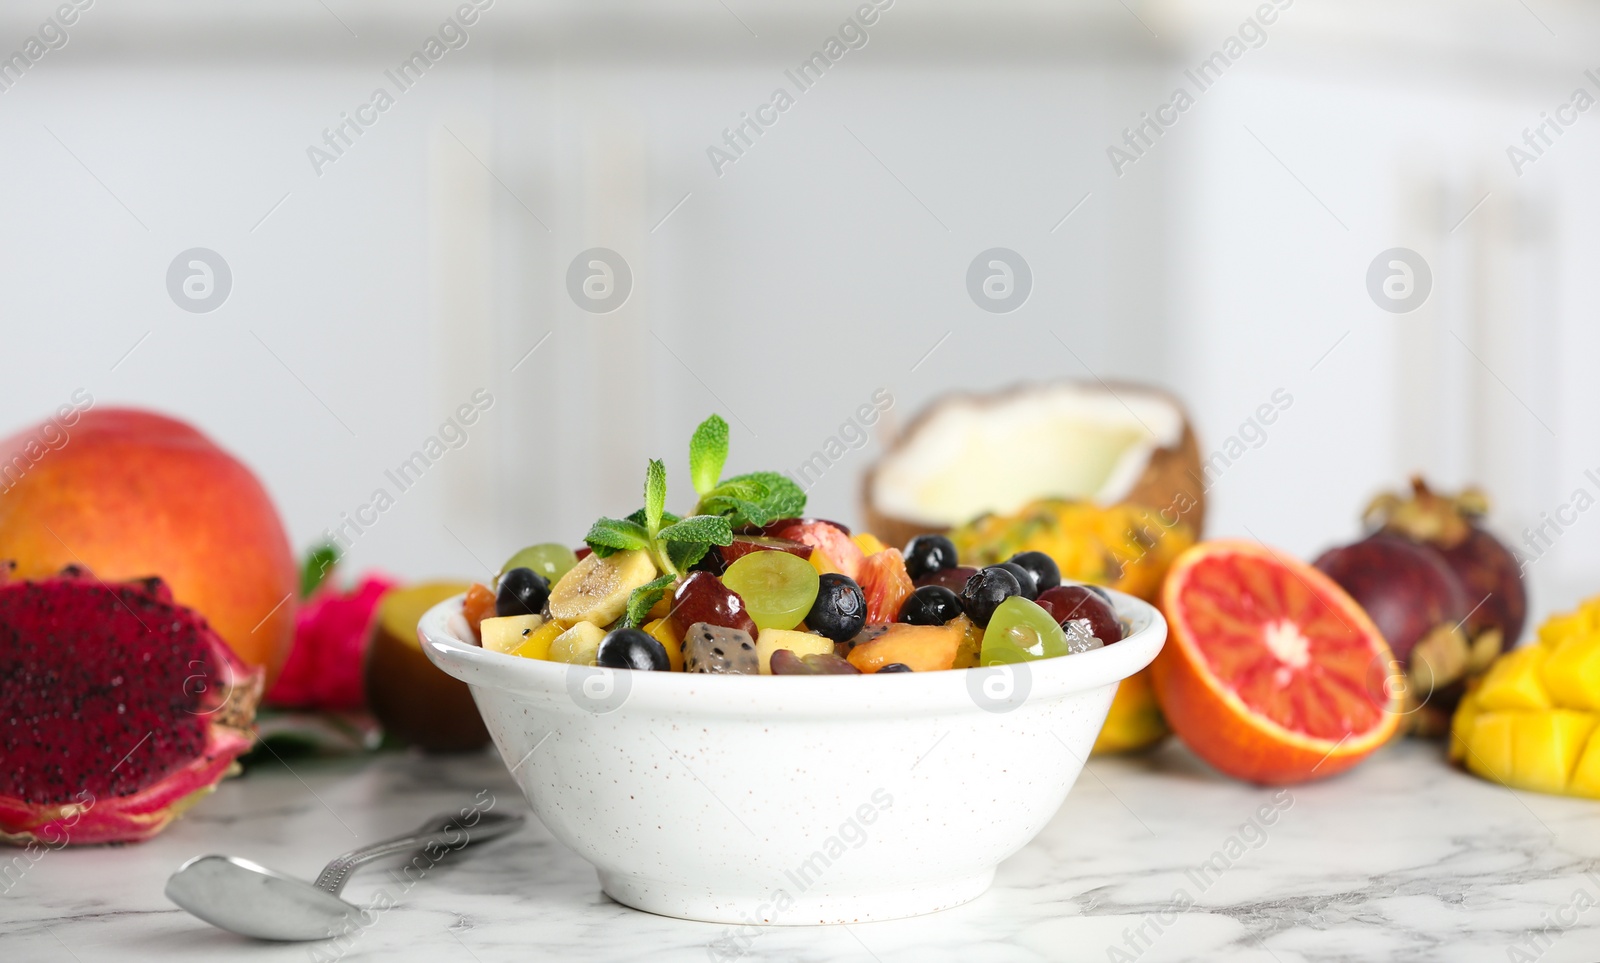 Photo of Delicious exotic fruit salad and ingredients on white marble table in kitchen